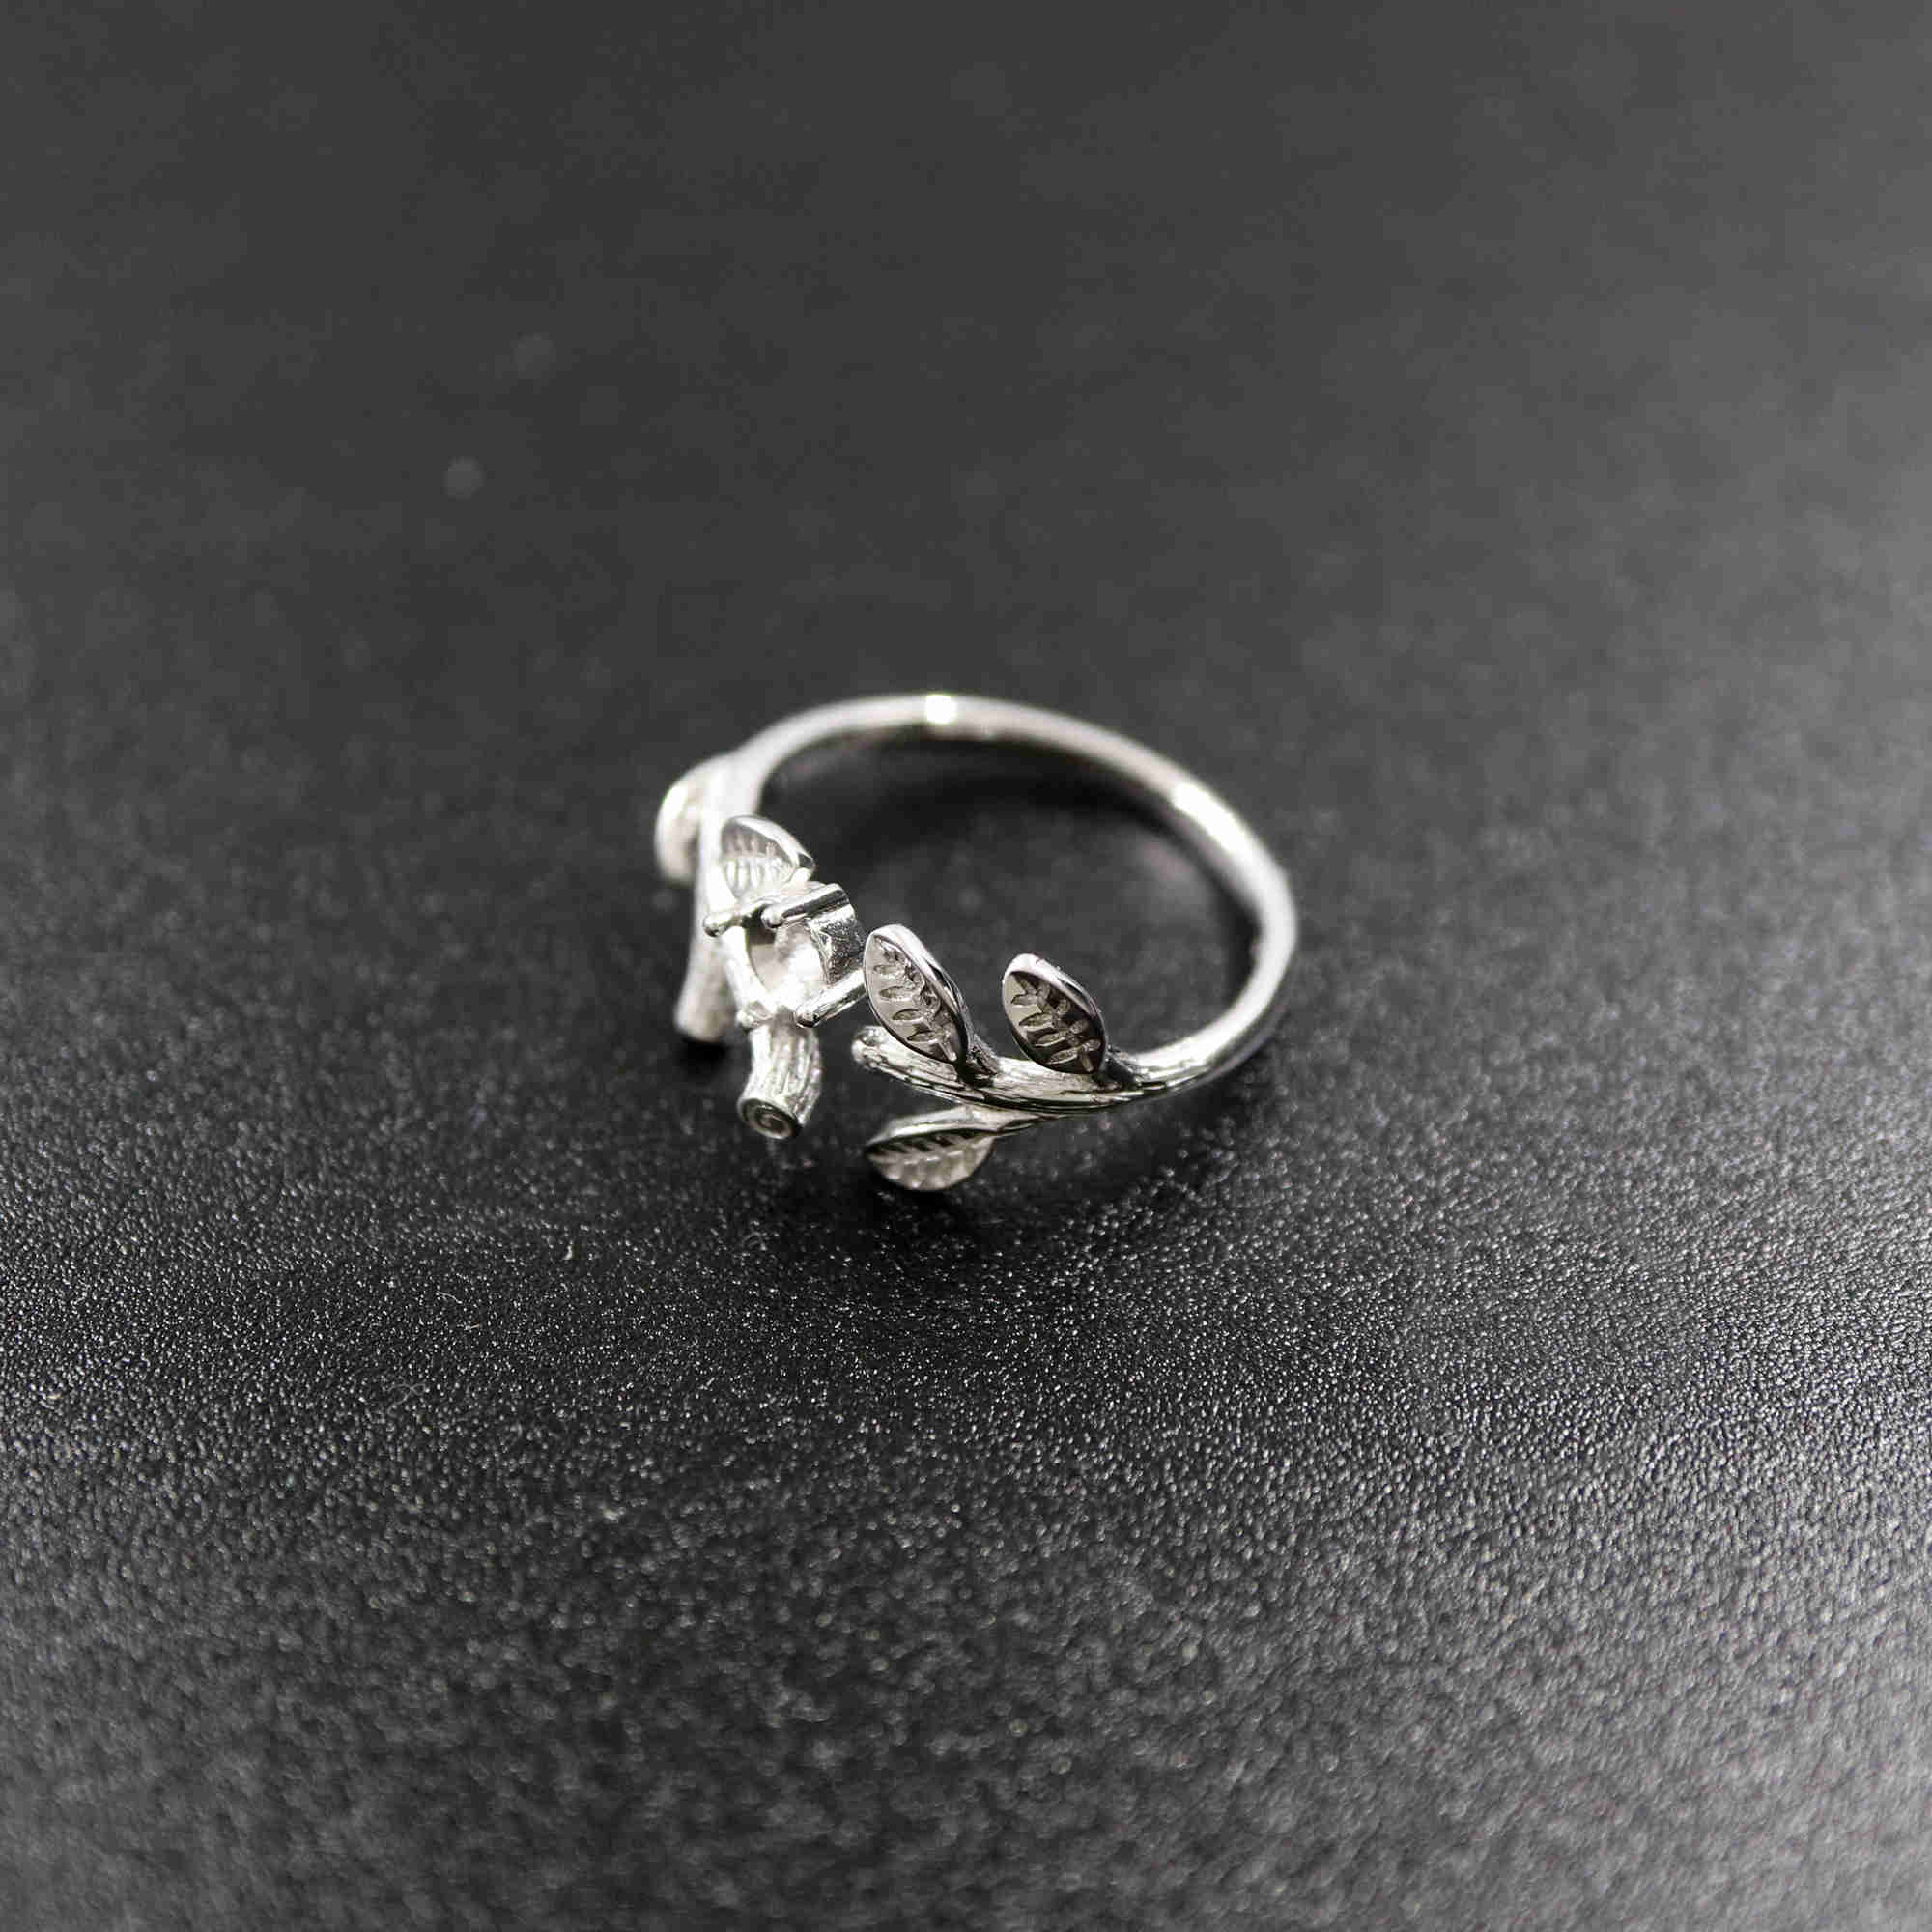 1Pcs 4MM Round Cz Stone Prong Setting Tree Branch Leaf 925 Sterling Silver Bezel Tray Adjustable Ring Settings 1212037 - Click Image to Close